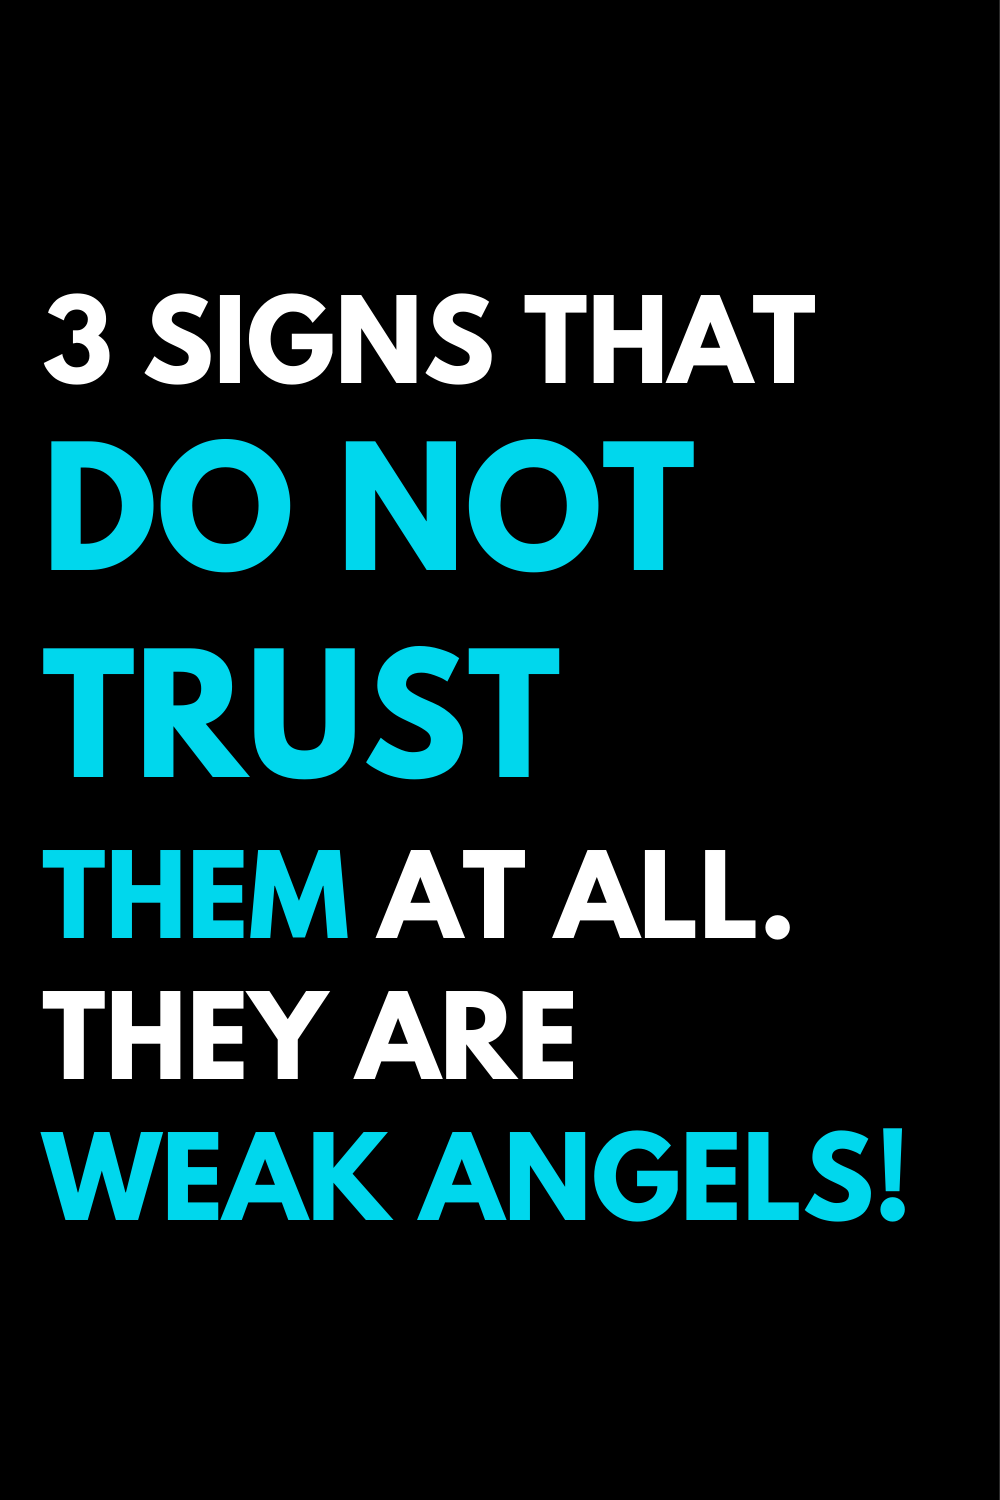 3 signs that do not trust them at all. They are weak angels!